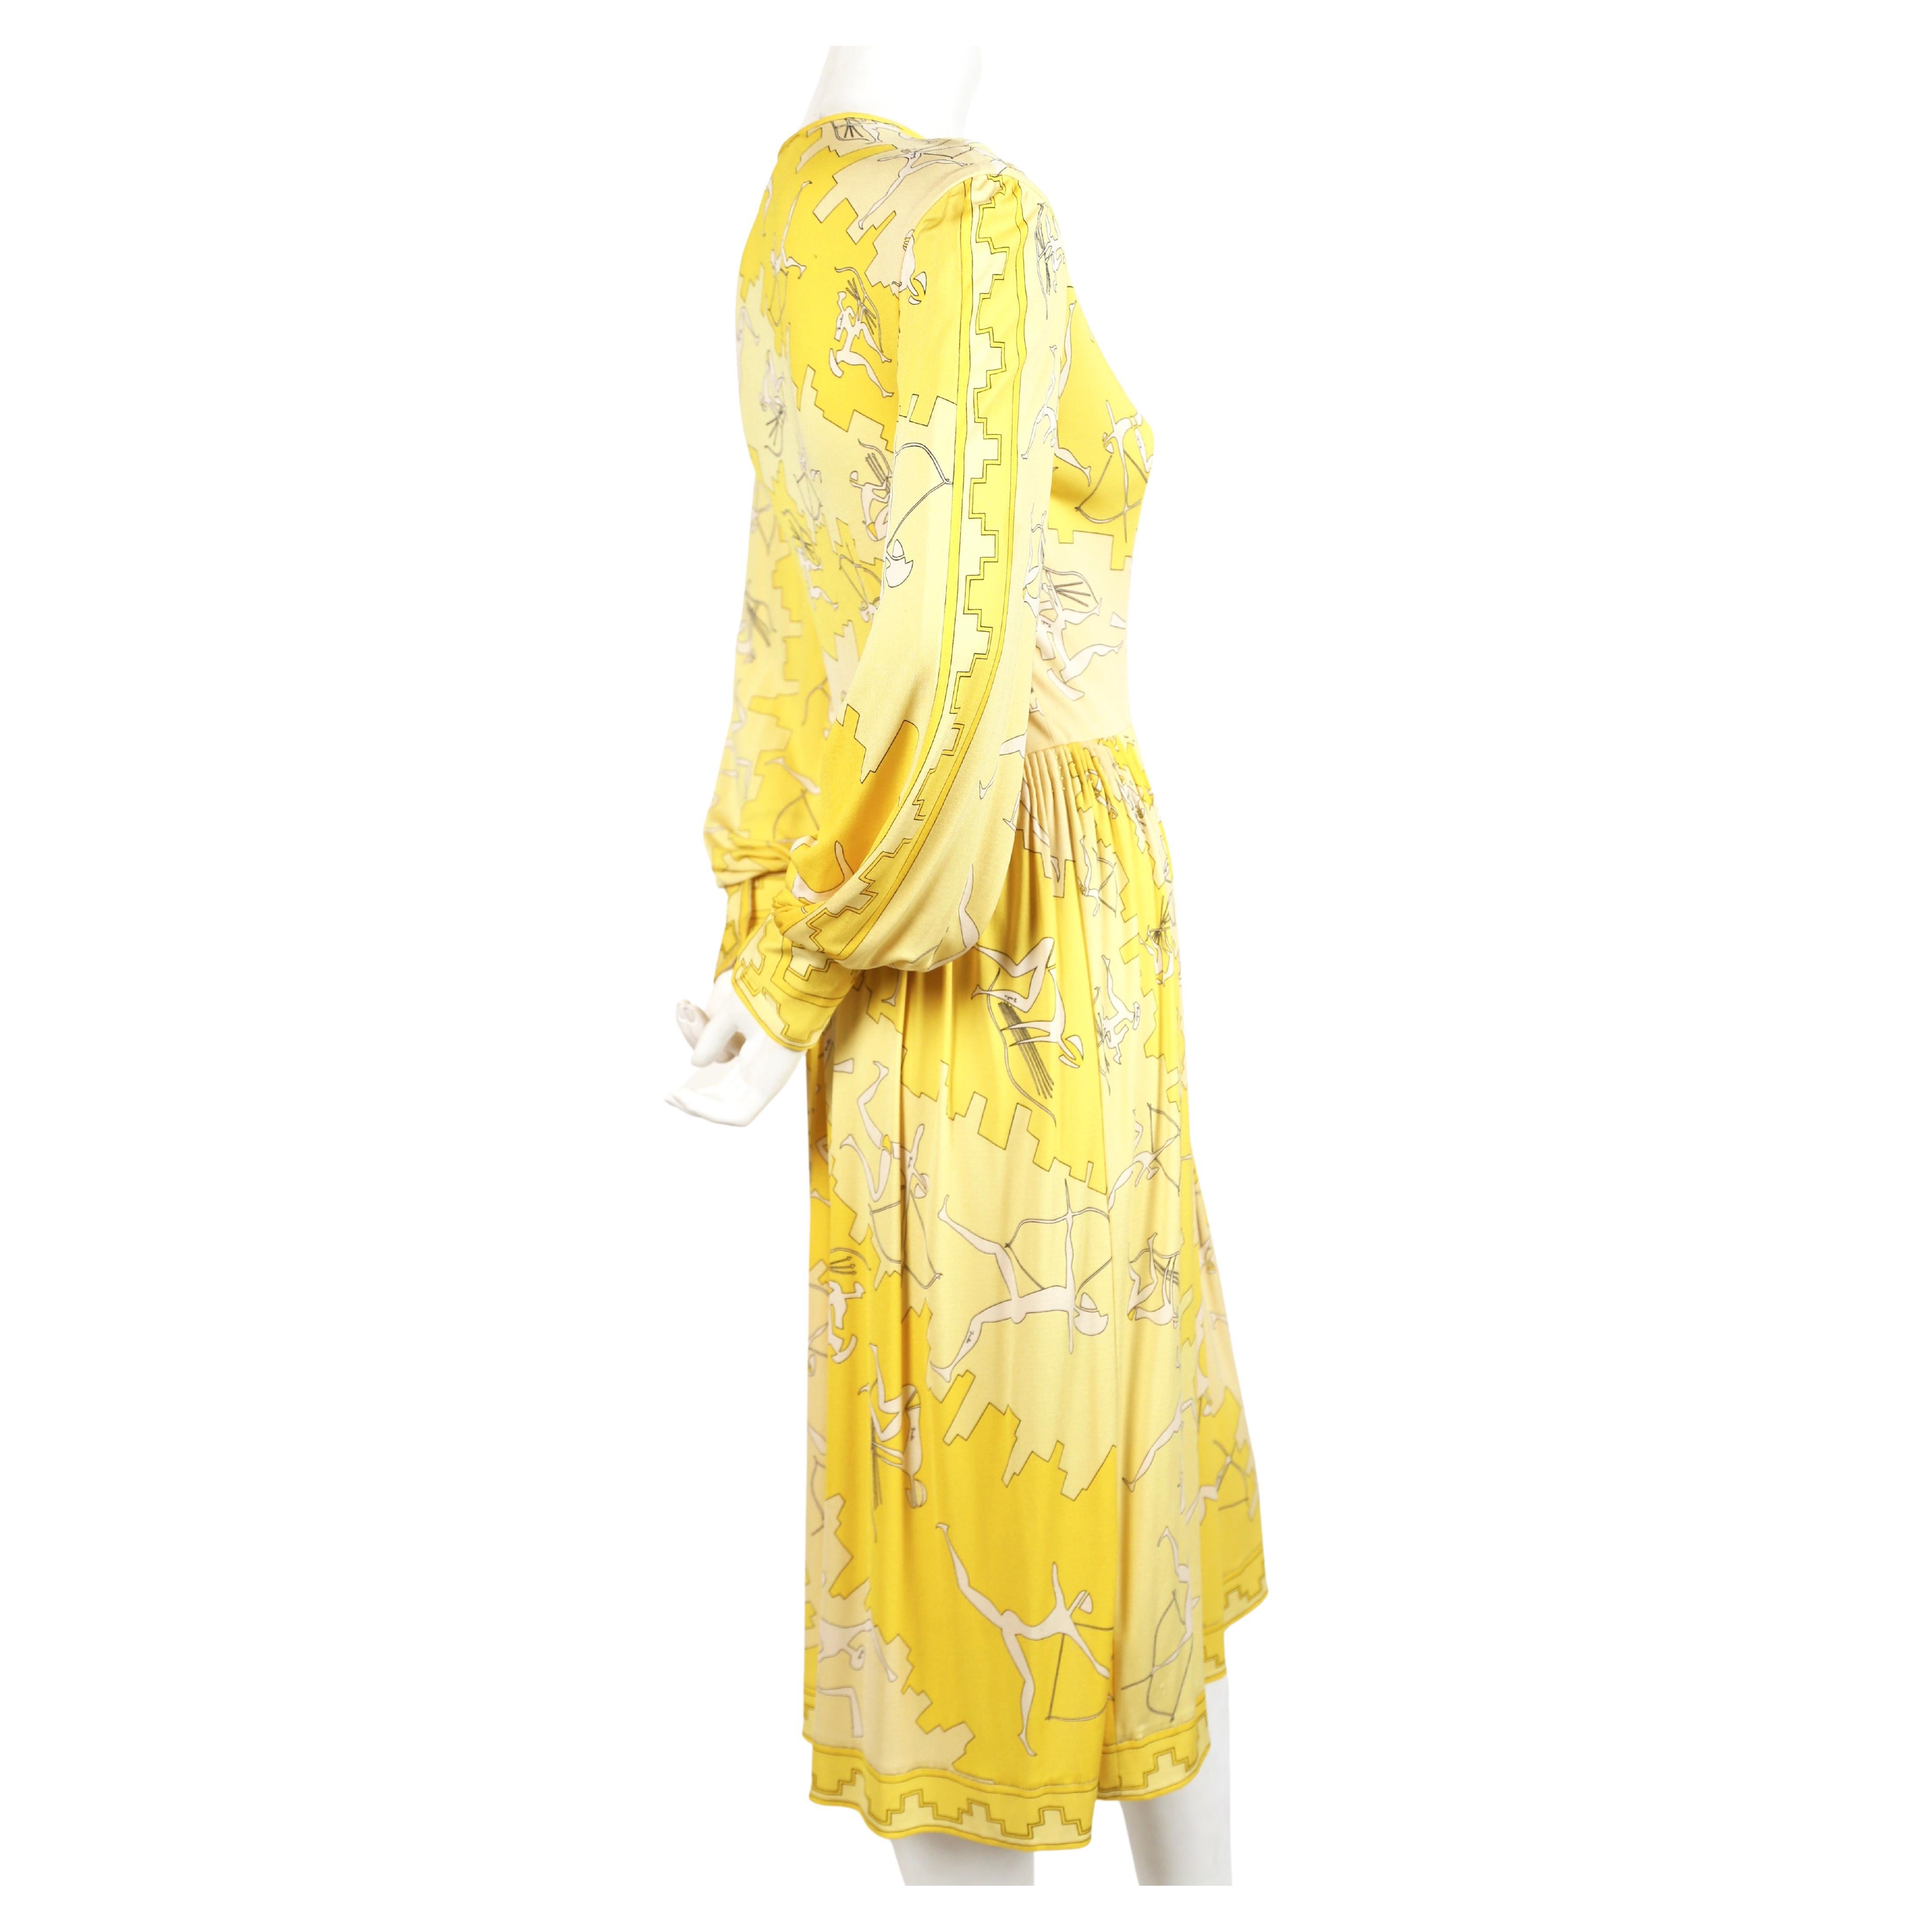 Vivid yellow silk jersey dress with whimsical archery print and hand stitched and hand pleated detail designed by Emilio Pucci dating to the 1970's. Fits a US 4 or 6. Approximate measurements: shoulders 15.5